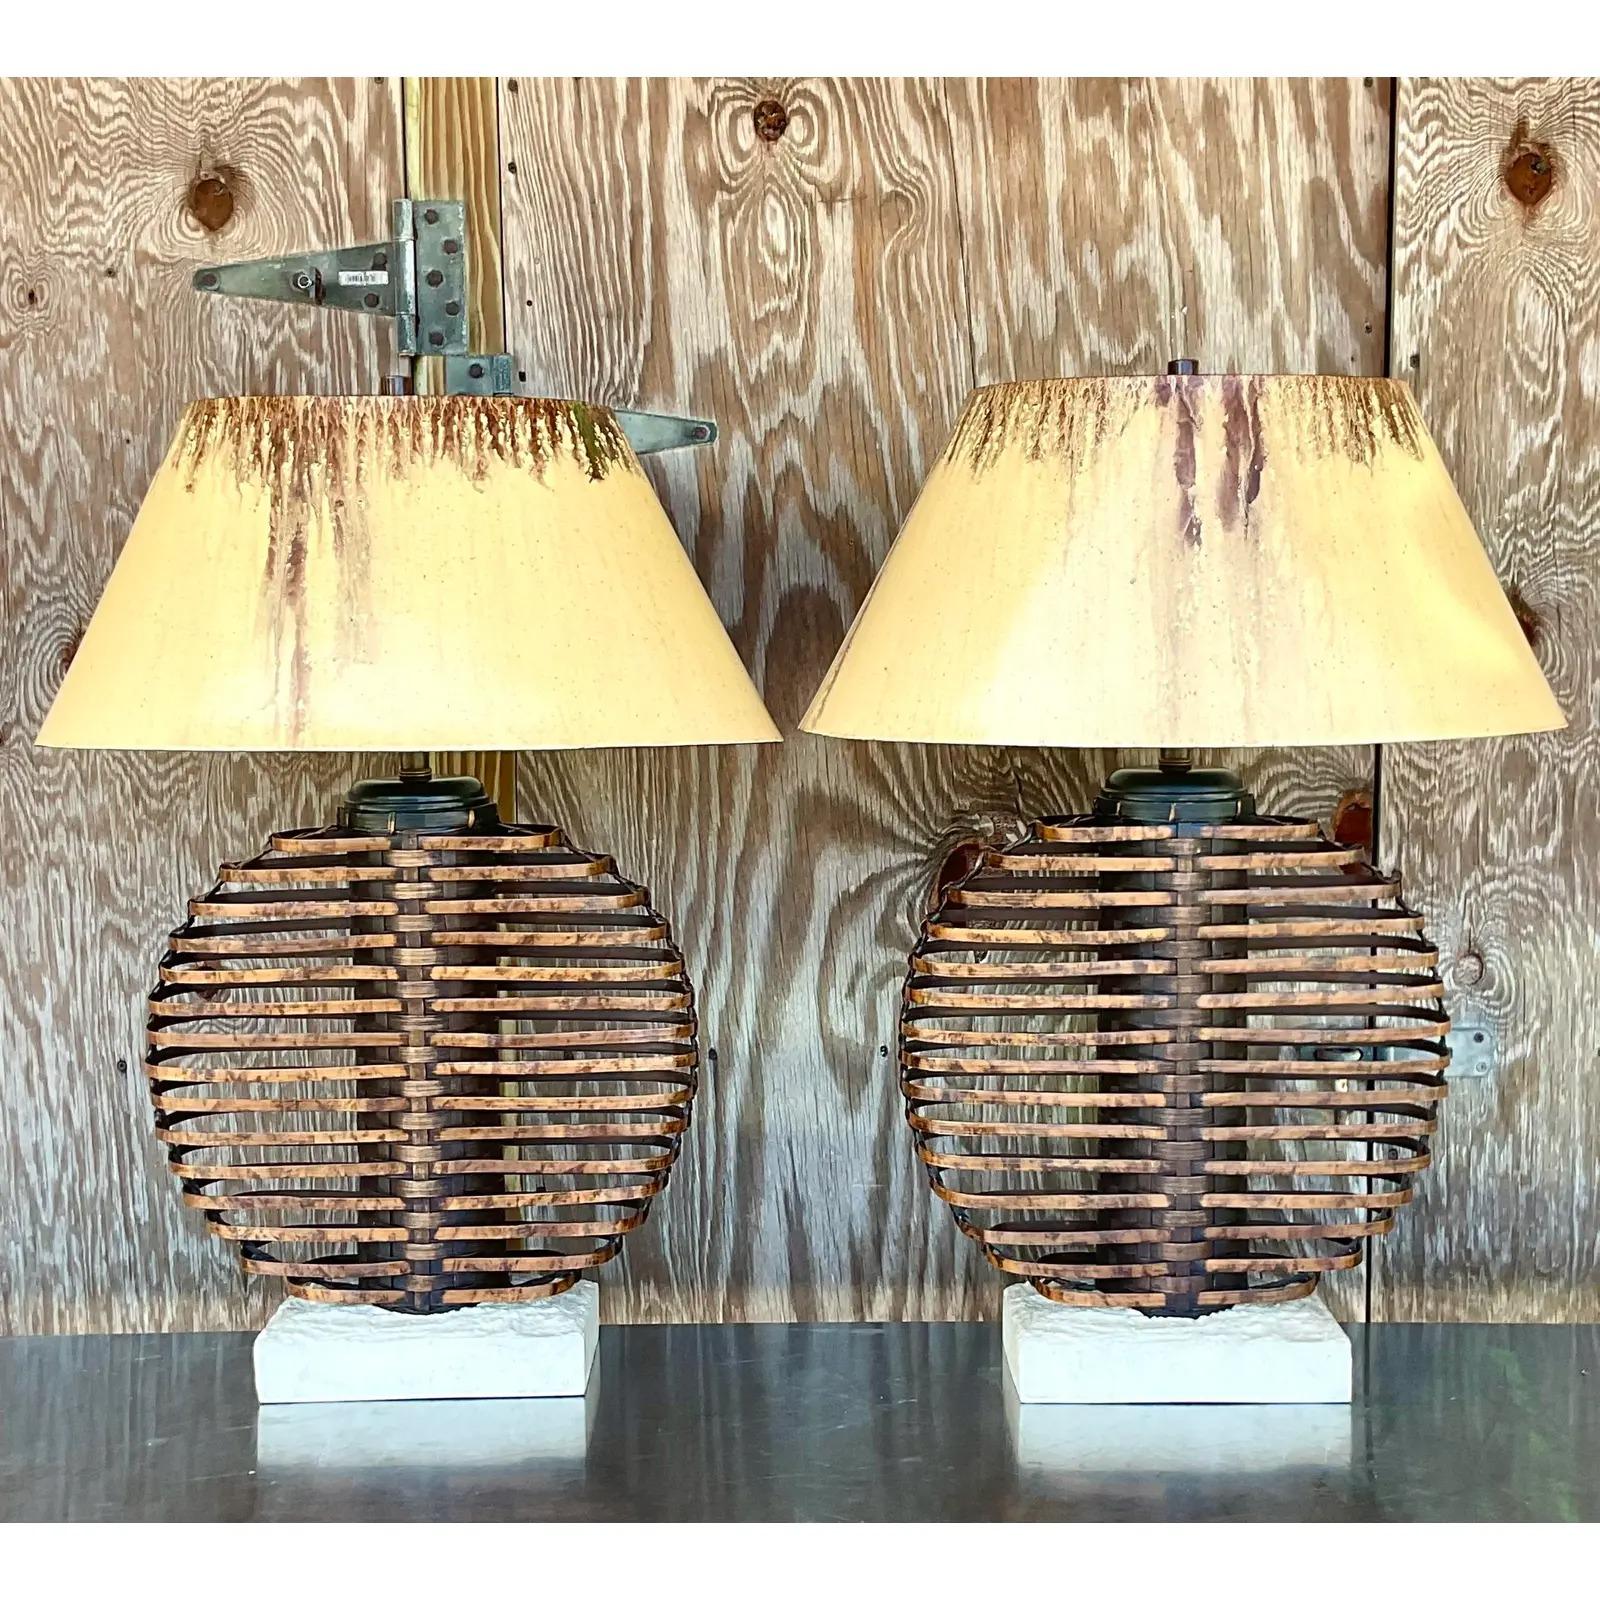 Fantastic pair of vintage Coastal table lamps. Monumental in size and drama. Made by the iconic Palecek with a bamboo cage design. Matching hand painted shades. Rest of faux coral plinths. Acquired from a Palm Beach estate.

The lamps are in great